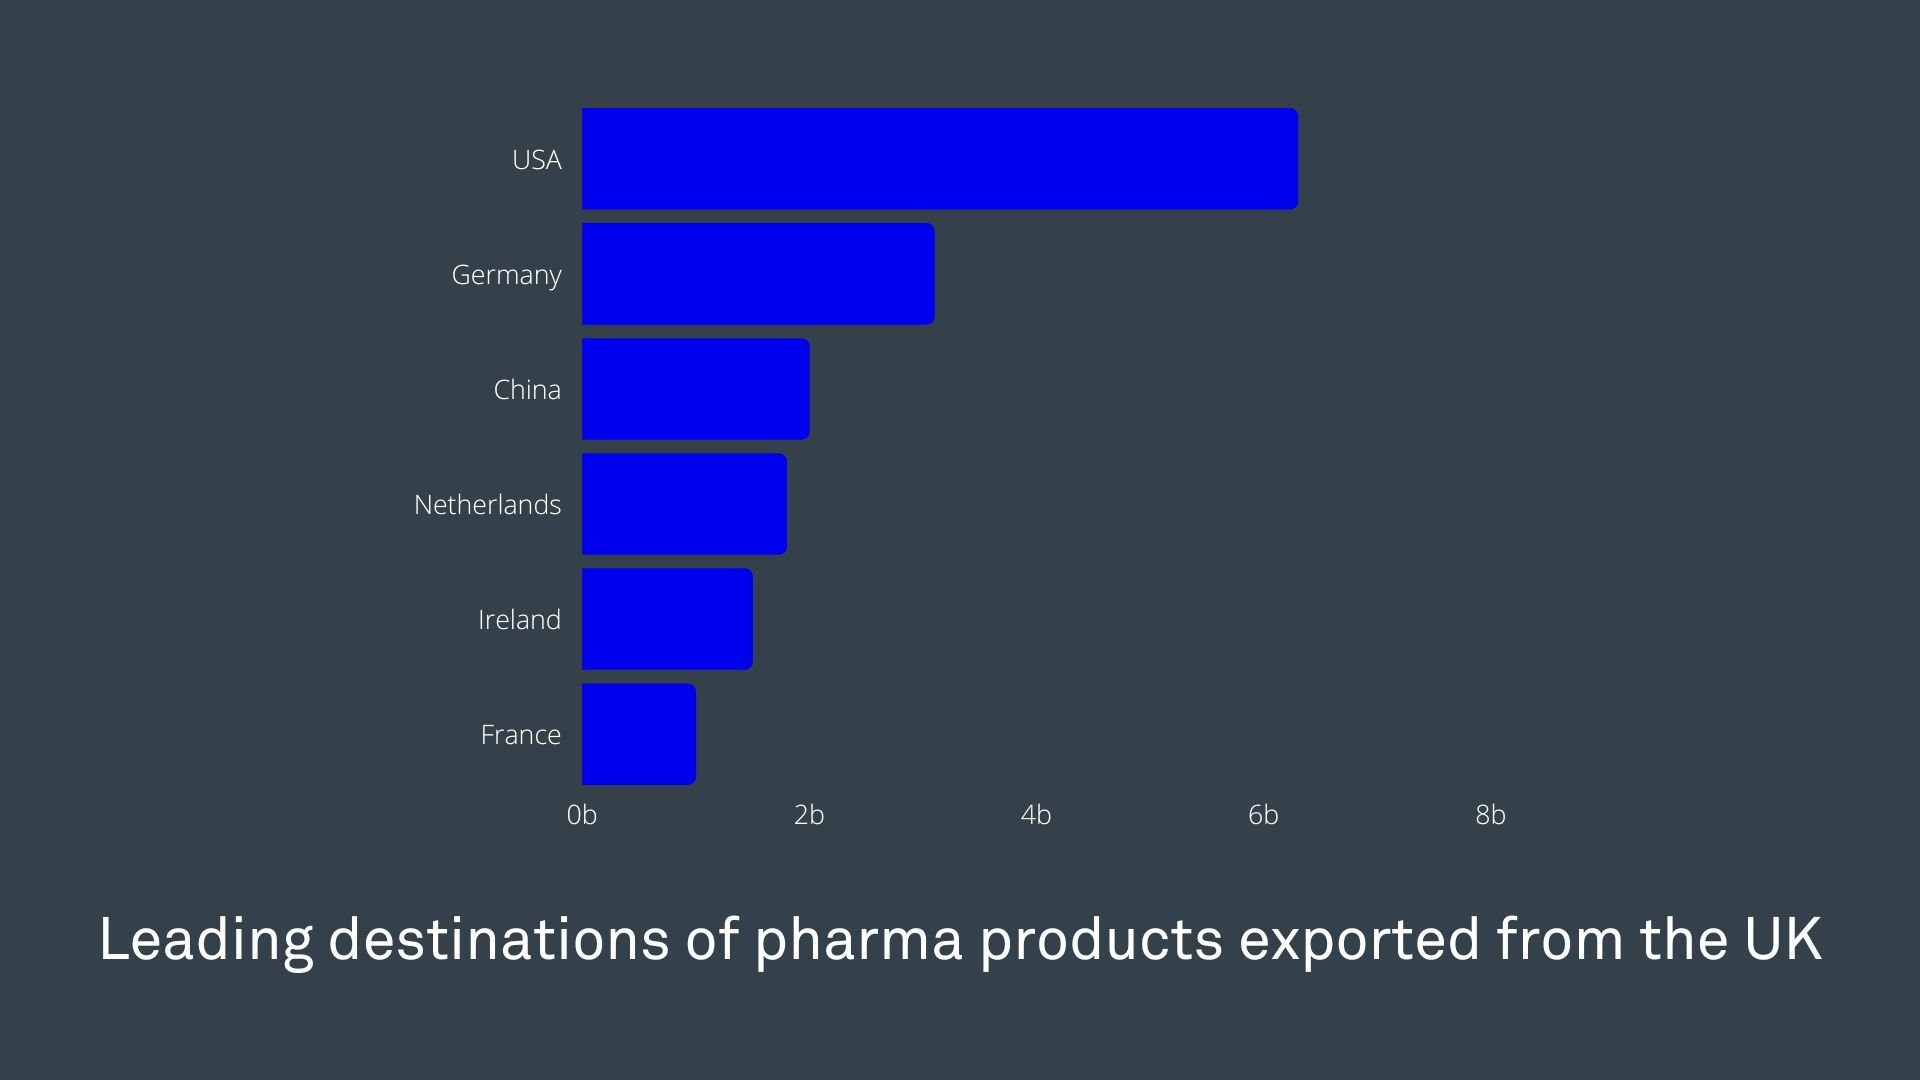 A bar chart showing the top  6 leading destinations of pharma products exported from the UK